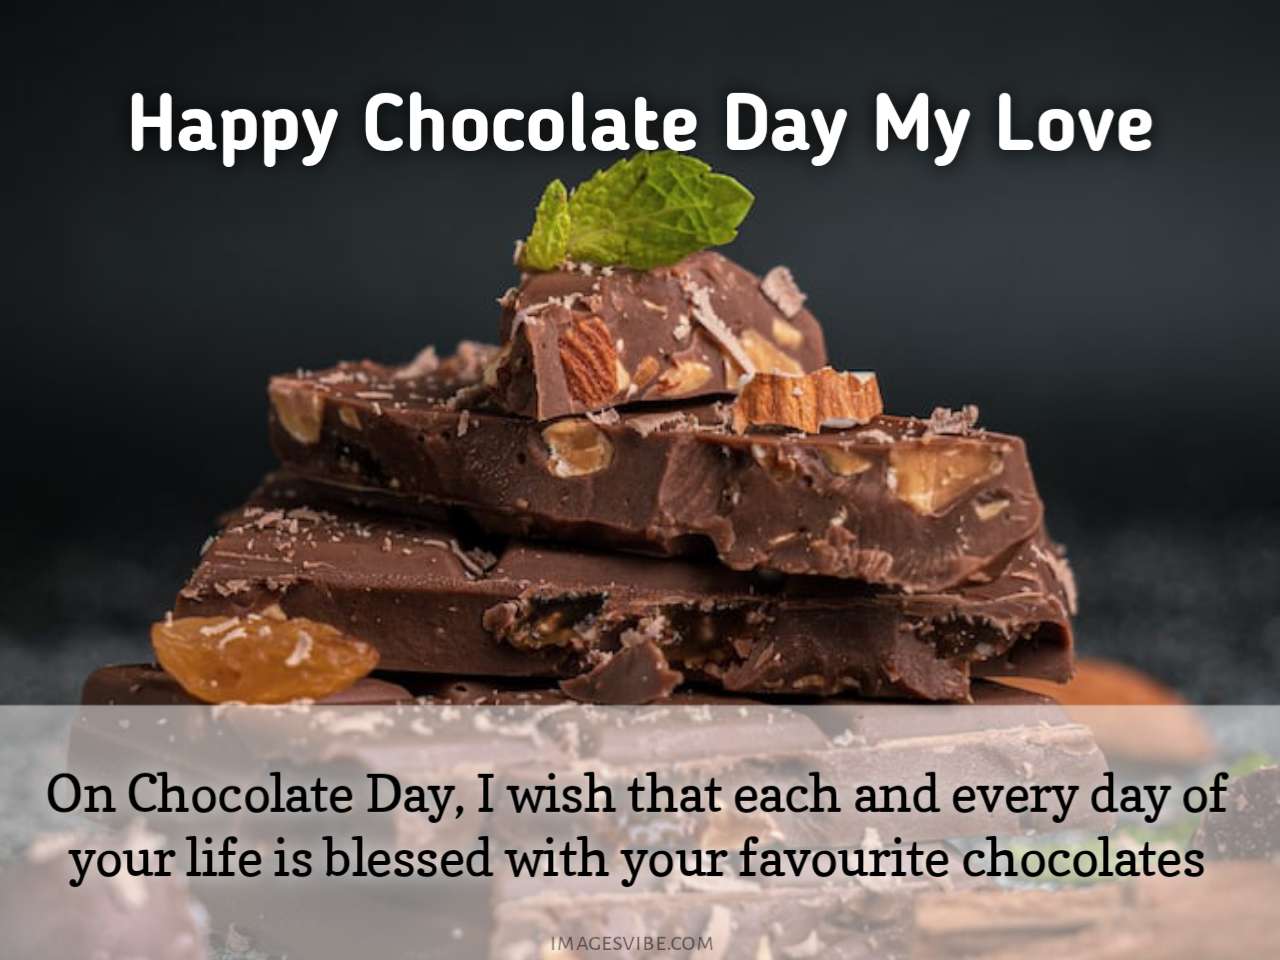 Best 30+ Happy Chocolate Day Images Wishes In 2023 - Images Vibe